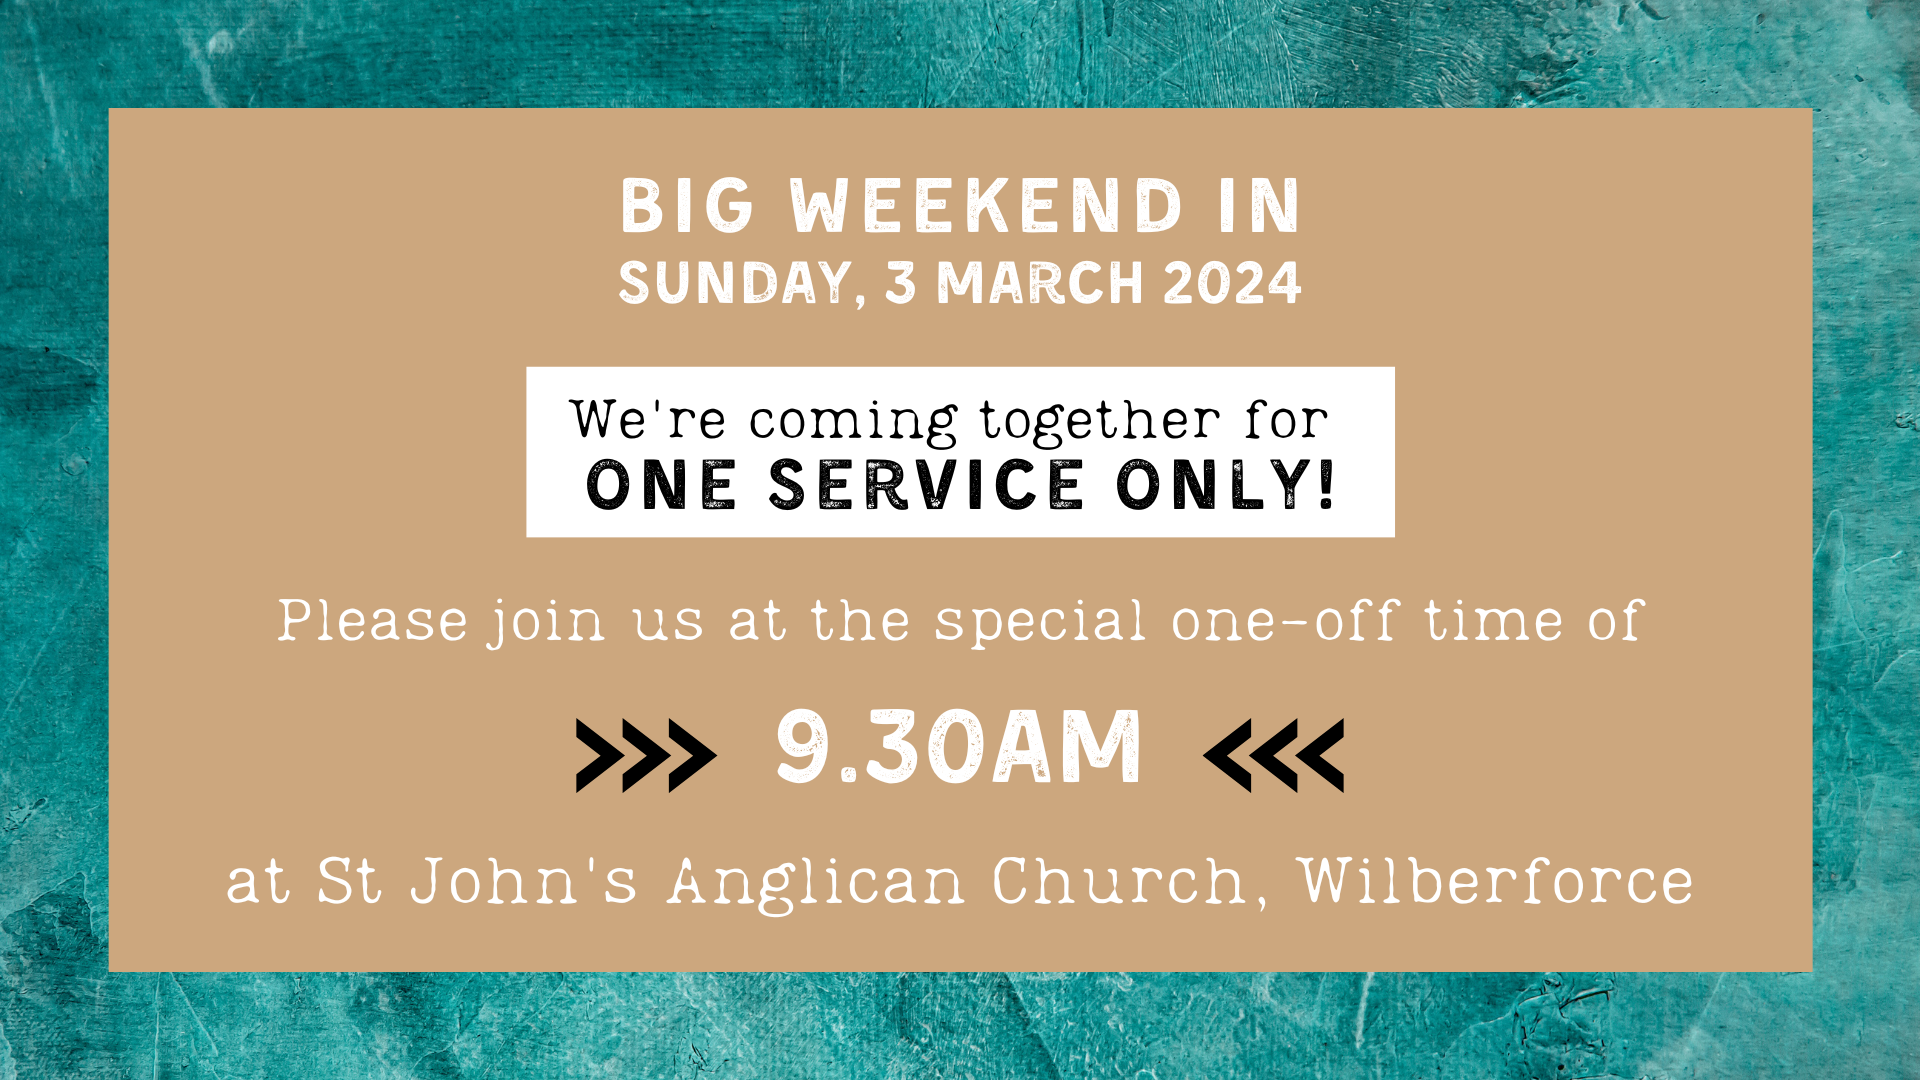 One church service only at 9:30am on 3 March 2024